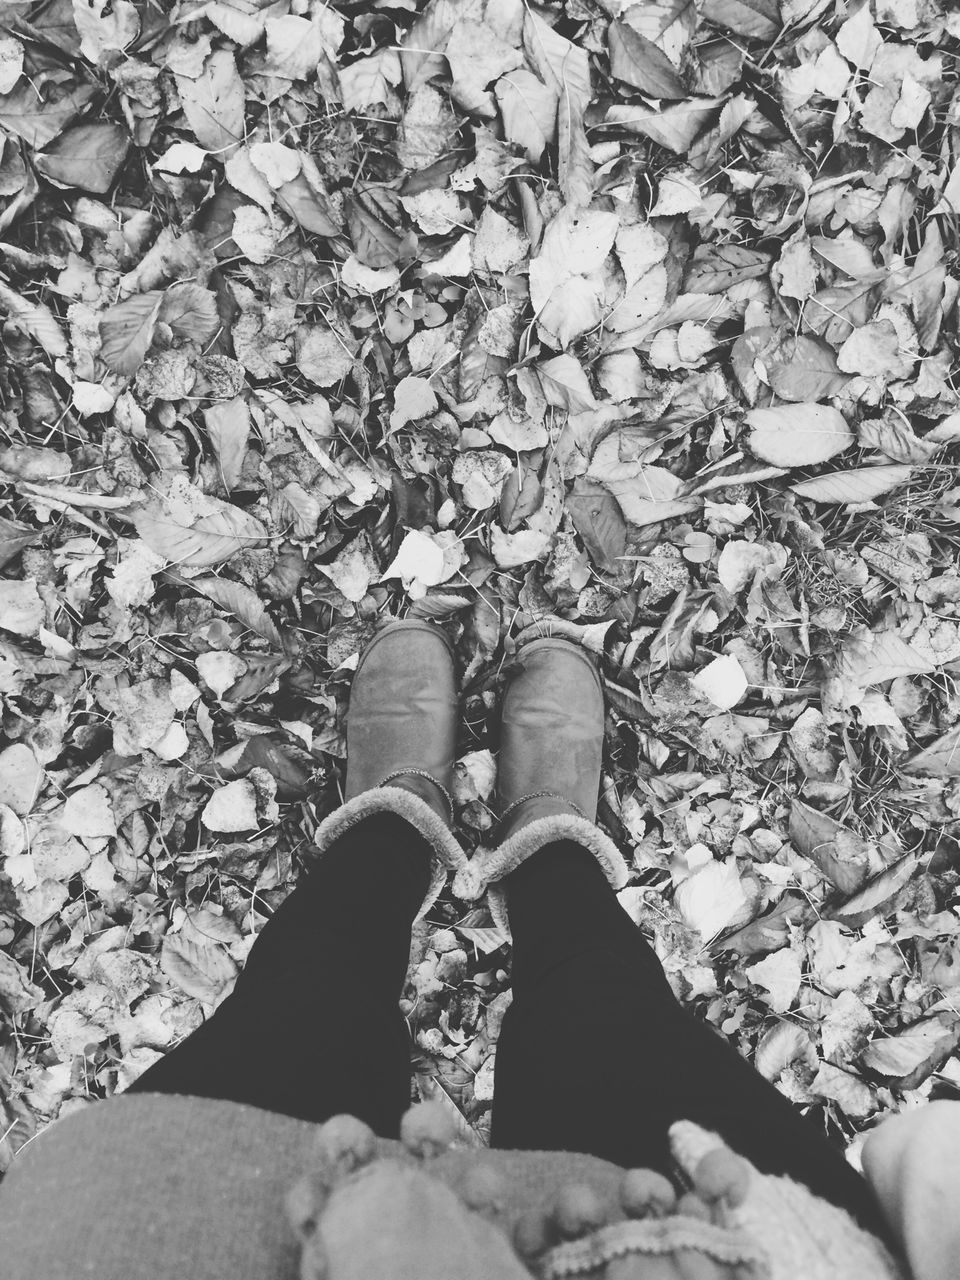 low section, person, leaf, shoe, high angle view, lifestyles, personal perspective, standing, autumn, leisure activity, day, outdoors, nature, unrecognizable person, season, dry, men